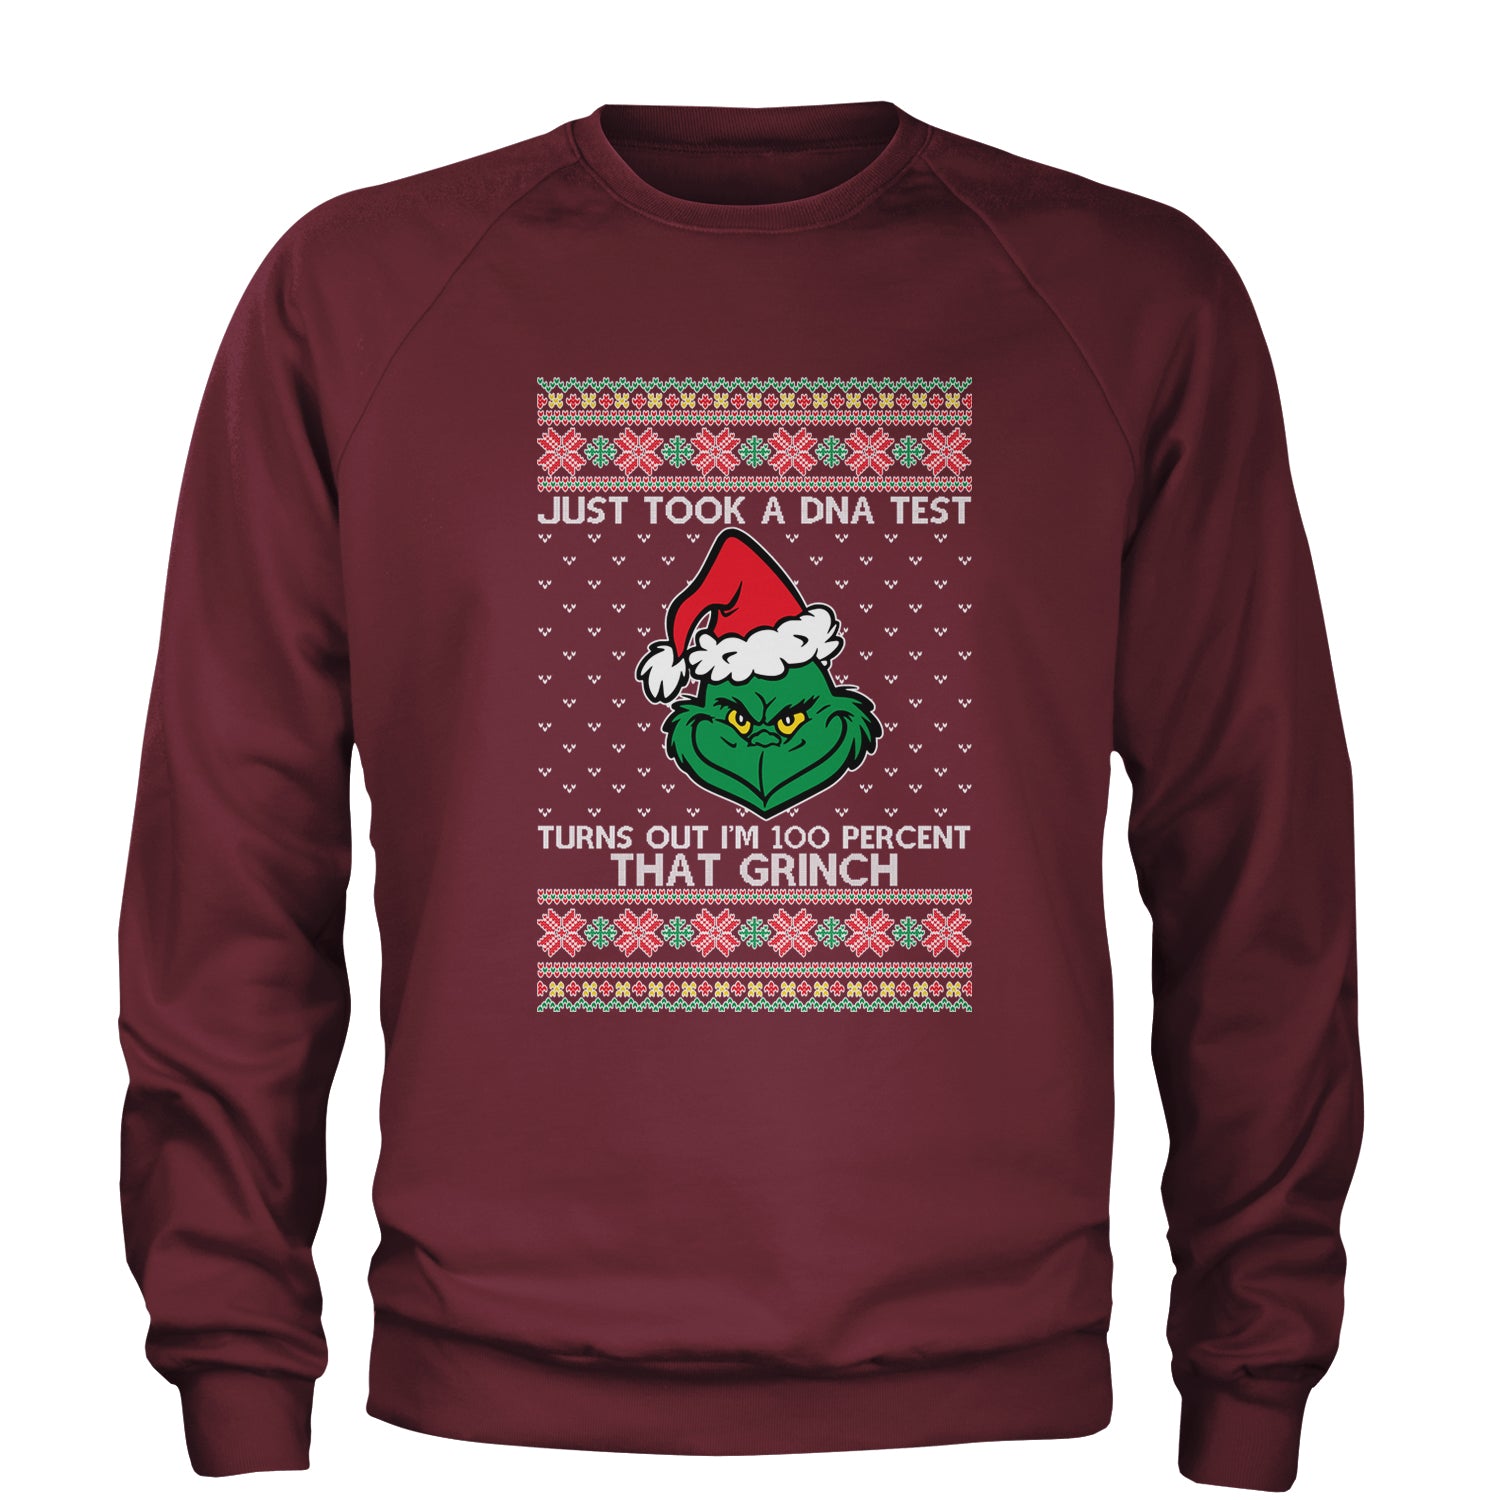 One Hundred Percent That Grinch Adult Crewneck Sweatshirt christmas, grinch, sweater, sweatshirt, ugly, xmas by Expression Tees